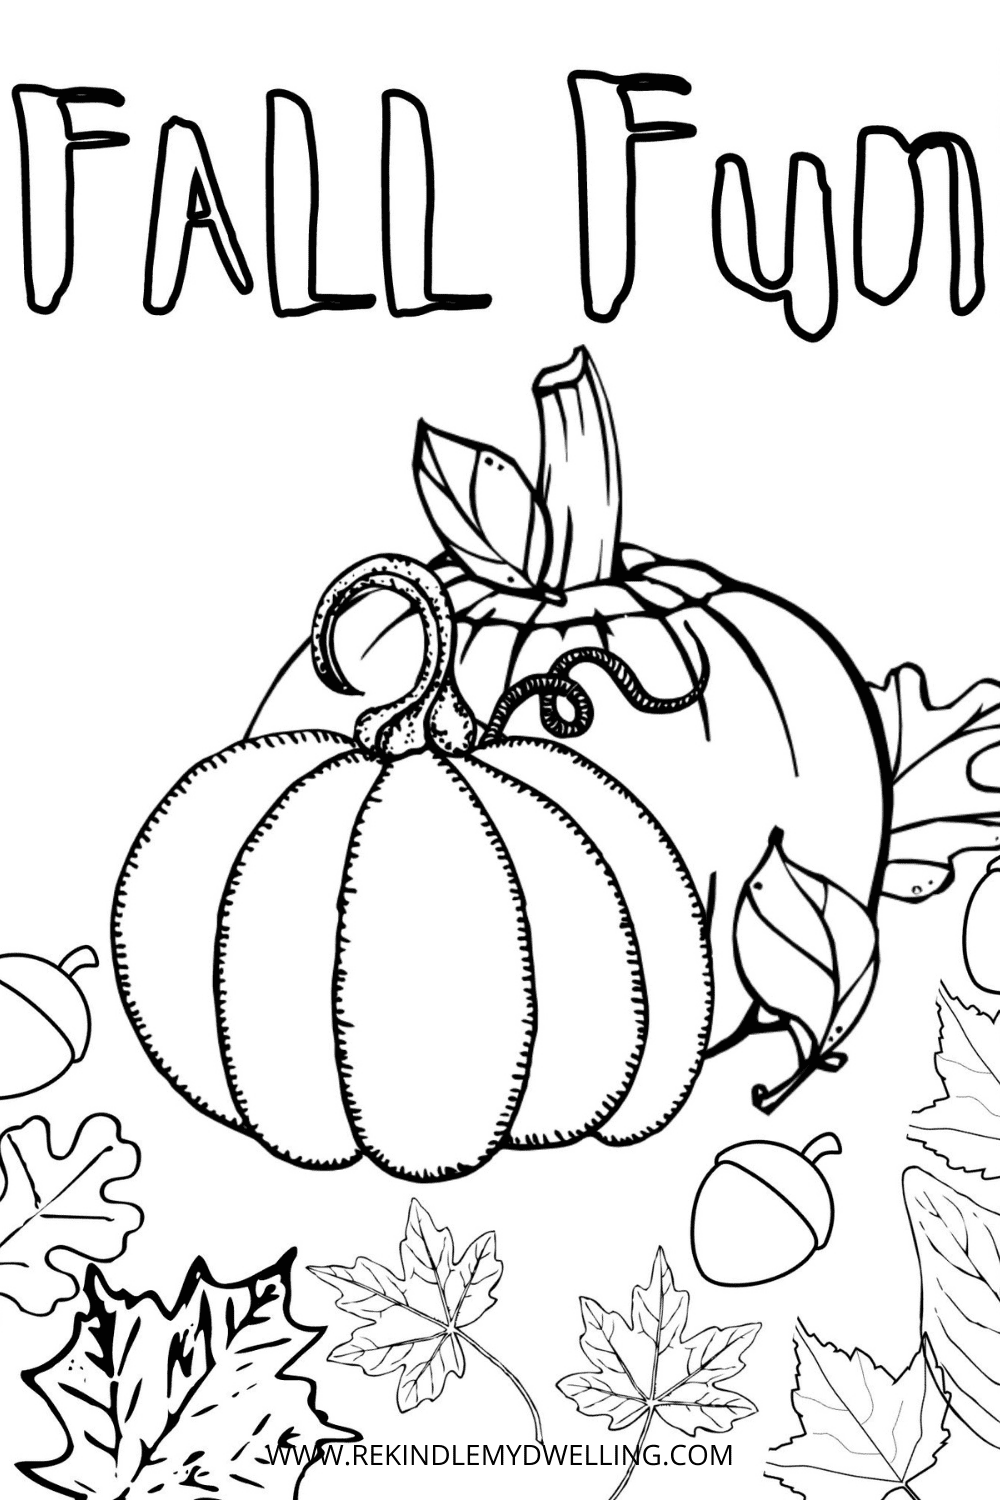 Fall coloring page with pumpkins and leaves.